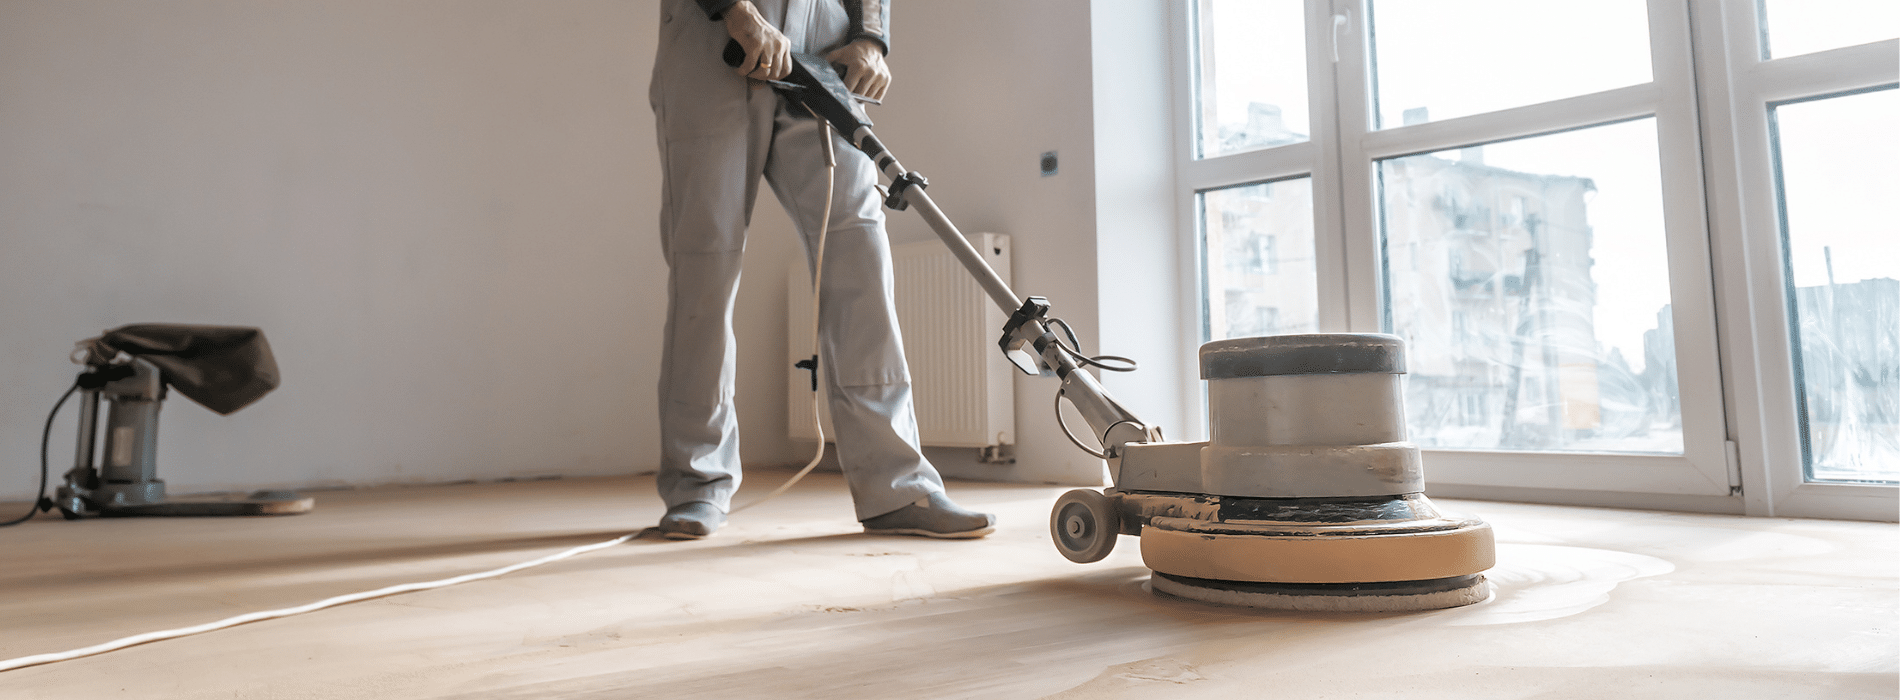 In Tottenham, N17, Mr Sander® use Bona FlexiSand 1.5 (Ø 407 mm) for parquet floor sanding. Direction-free sanding down to bare wood with 1.5 kW power. Connected to HEPA-filtered dust extraction for clean and efficient results.